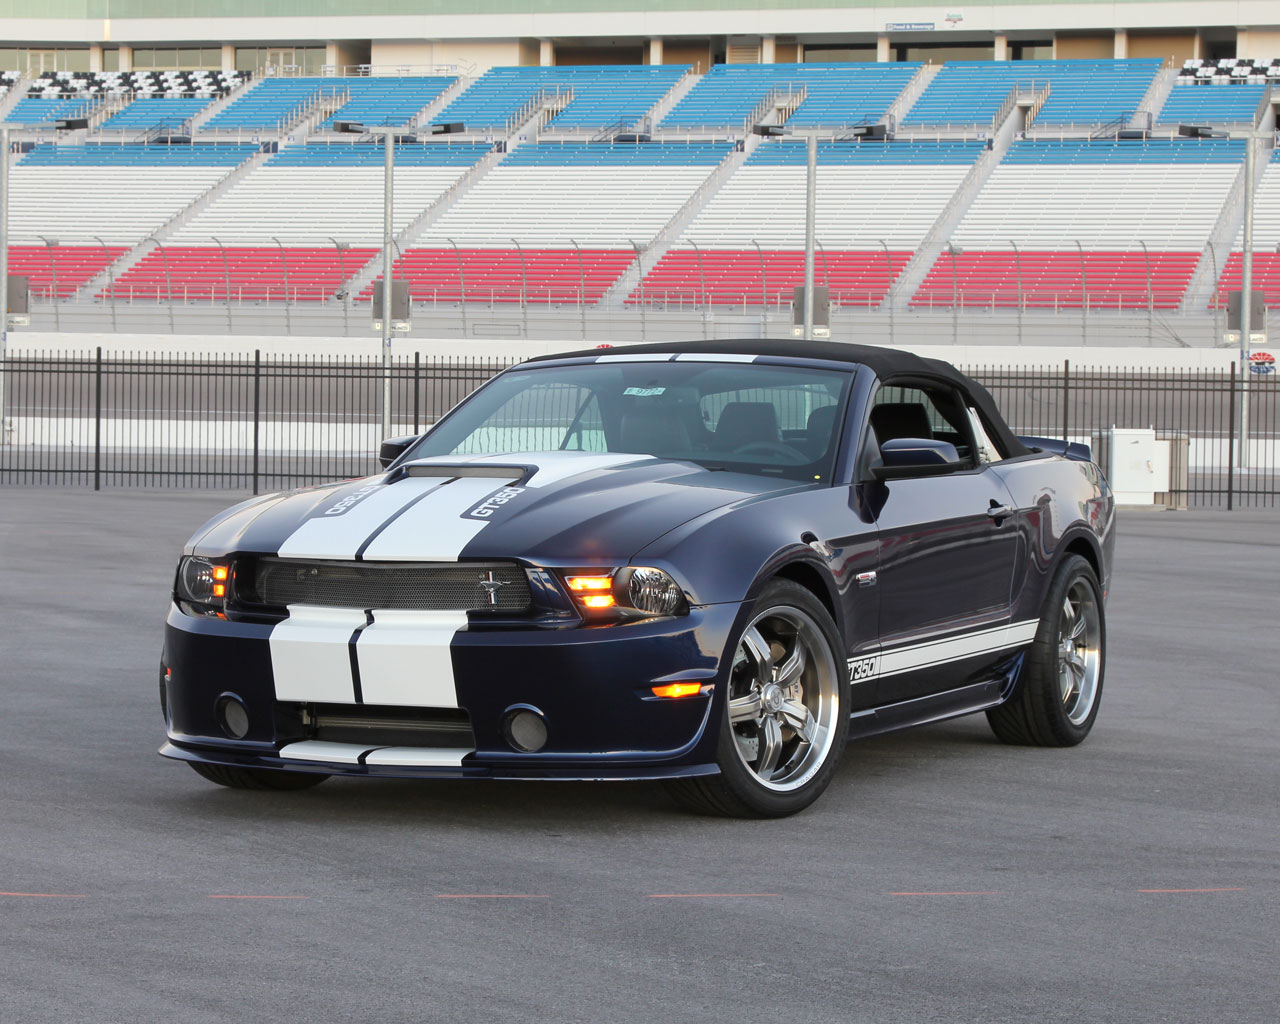 2012 Ford mustang shelby gt350 convertible #5